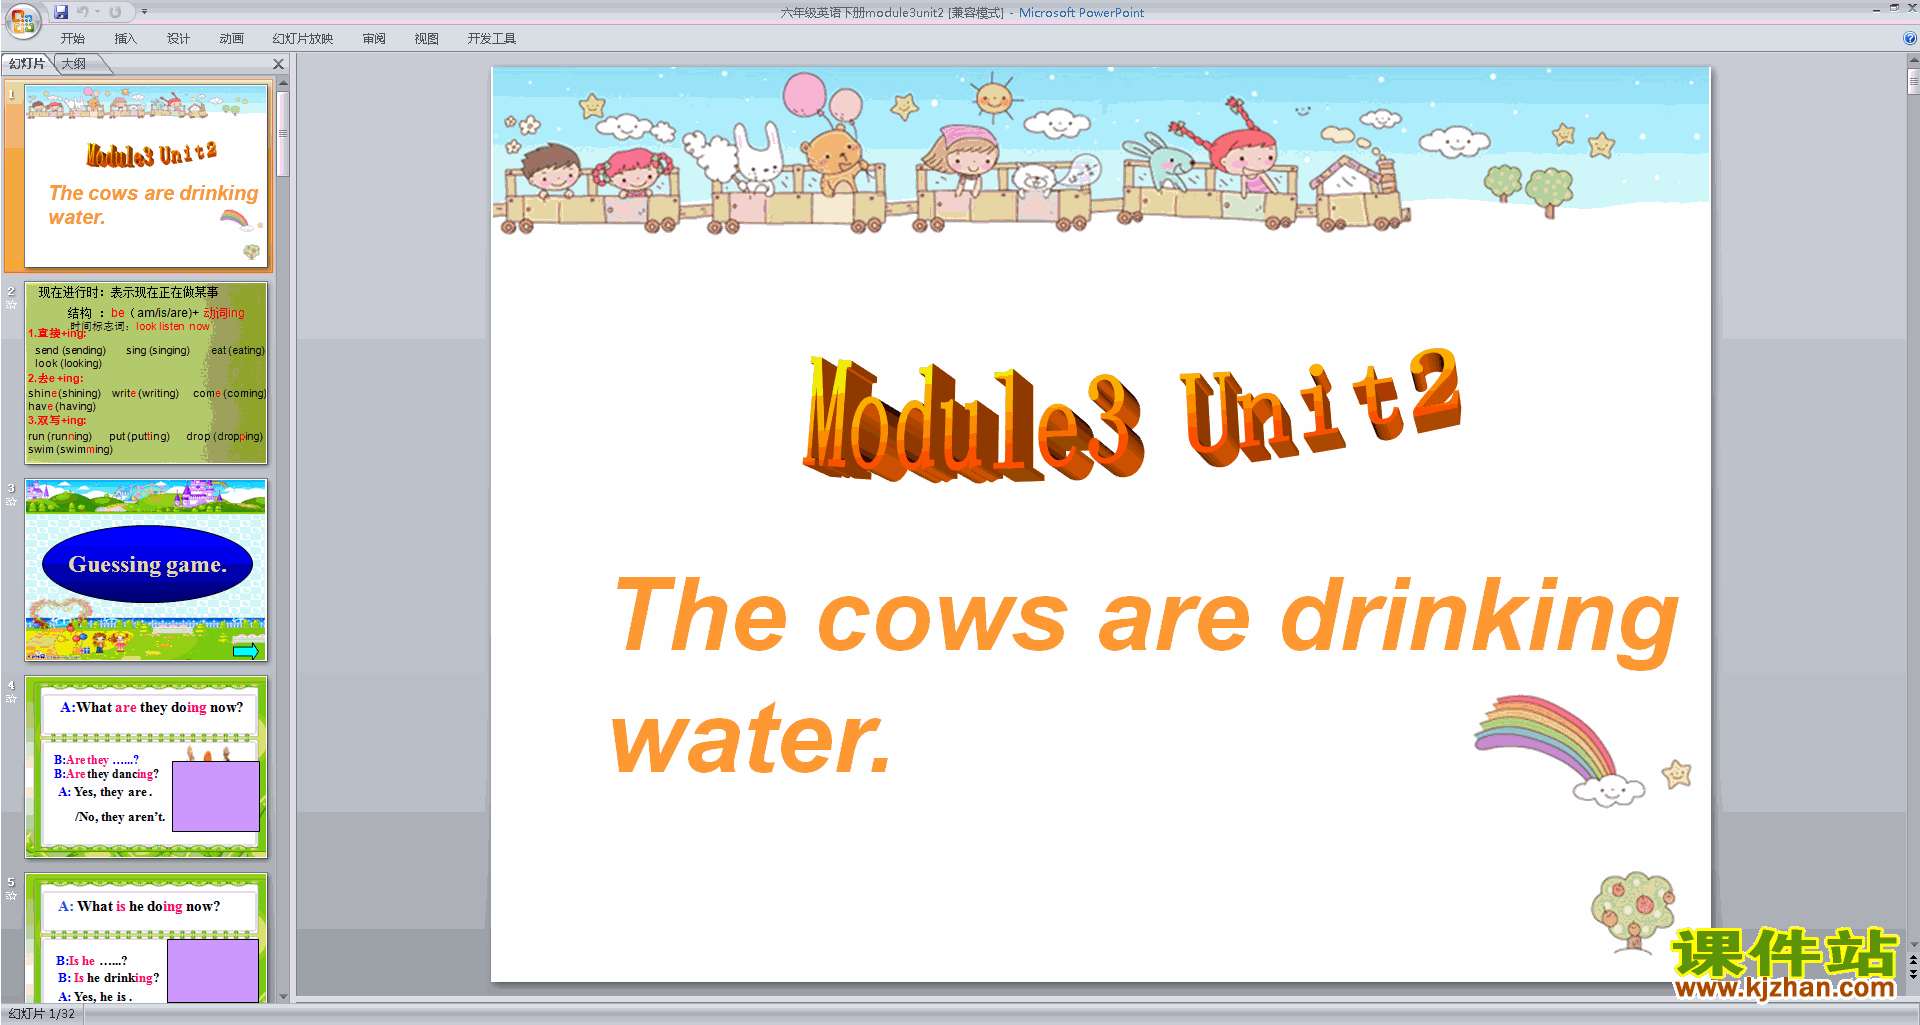 аӢUnit2 The cows are drinking waterpptμ